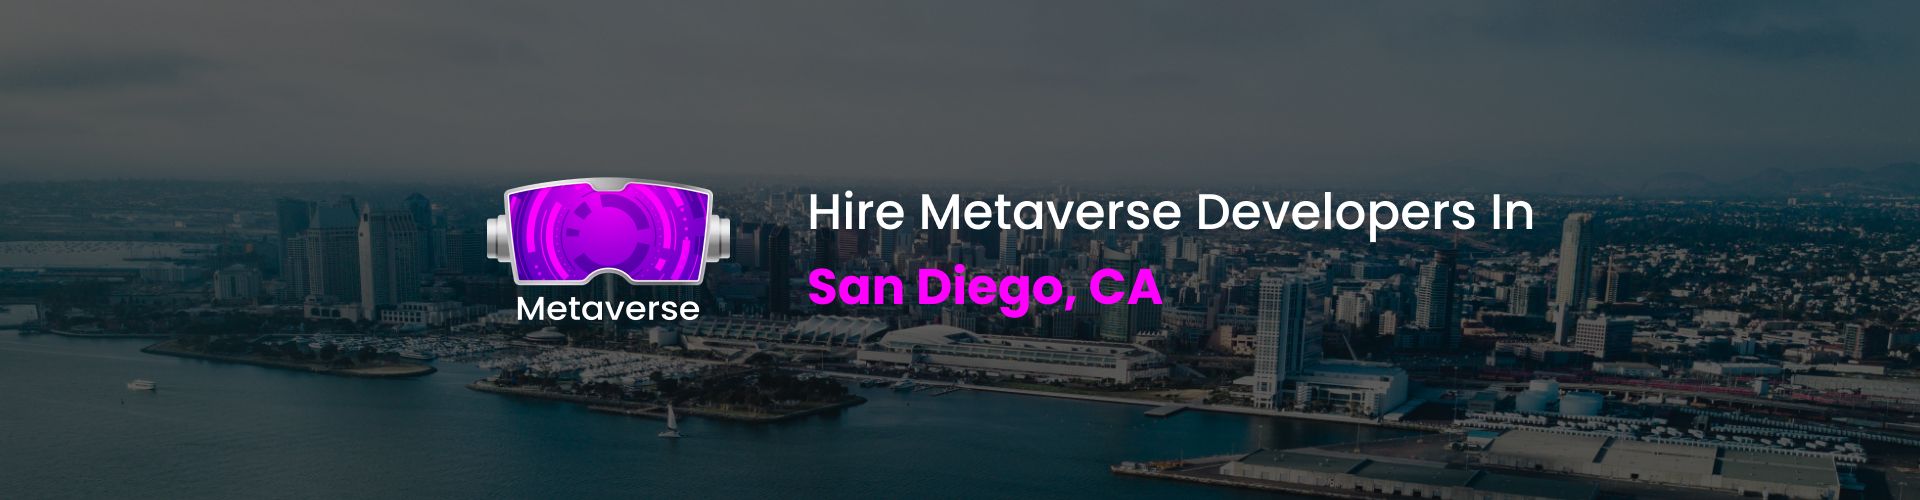 hire metaverse developers in san diego